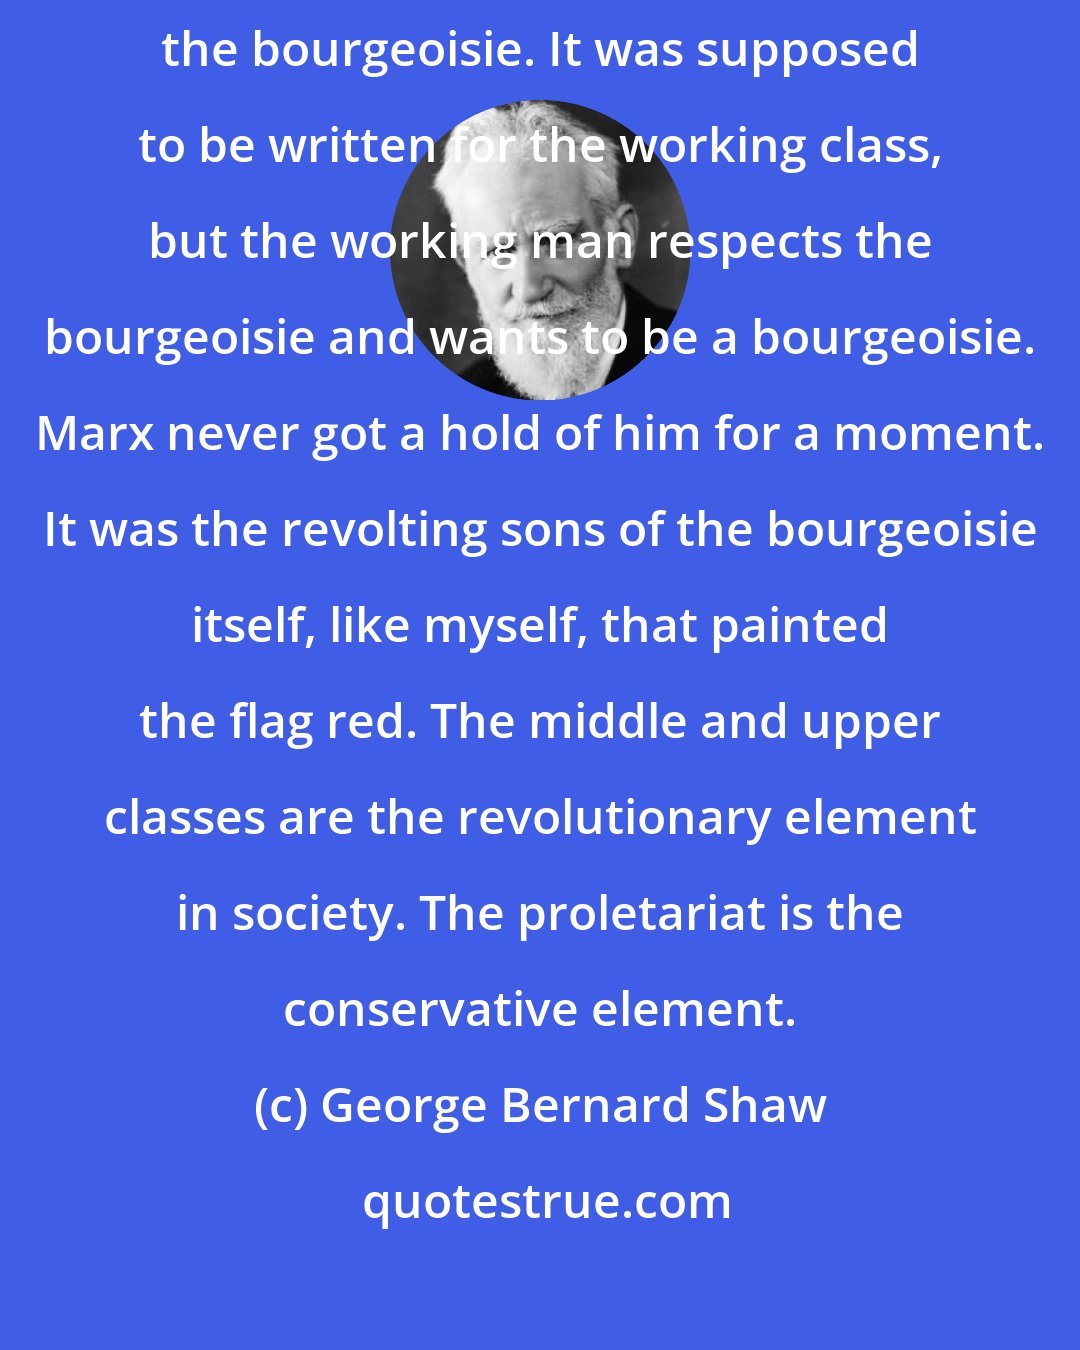 George Bernard Shaw: Marx's Kapital is not a treatise on socialism; it is a gerrymand against the bourgeoisie. It was supposed to be written for the working class, but the working man respects the bourgeoisie and wants to be a bourgeoisie. Marx never got a hold of him for a moment. It was the revolting sons of the bourgeoisie itself, like myself, that painted the flag red. The middle and upper classes are the revolutionary element in society. The proletariat is the conservative element.